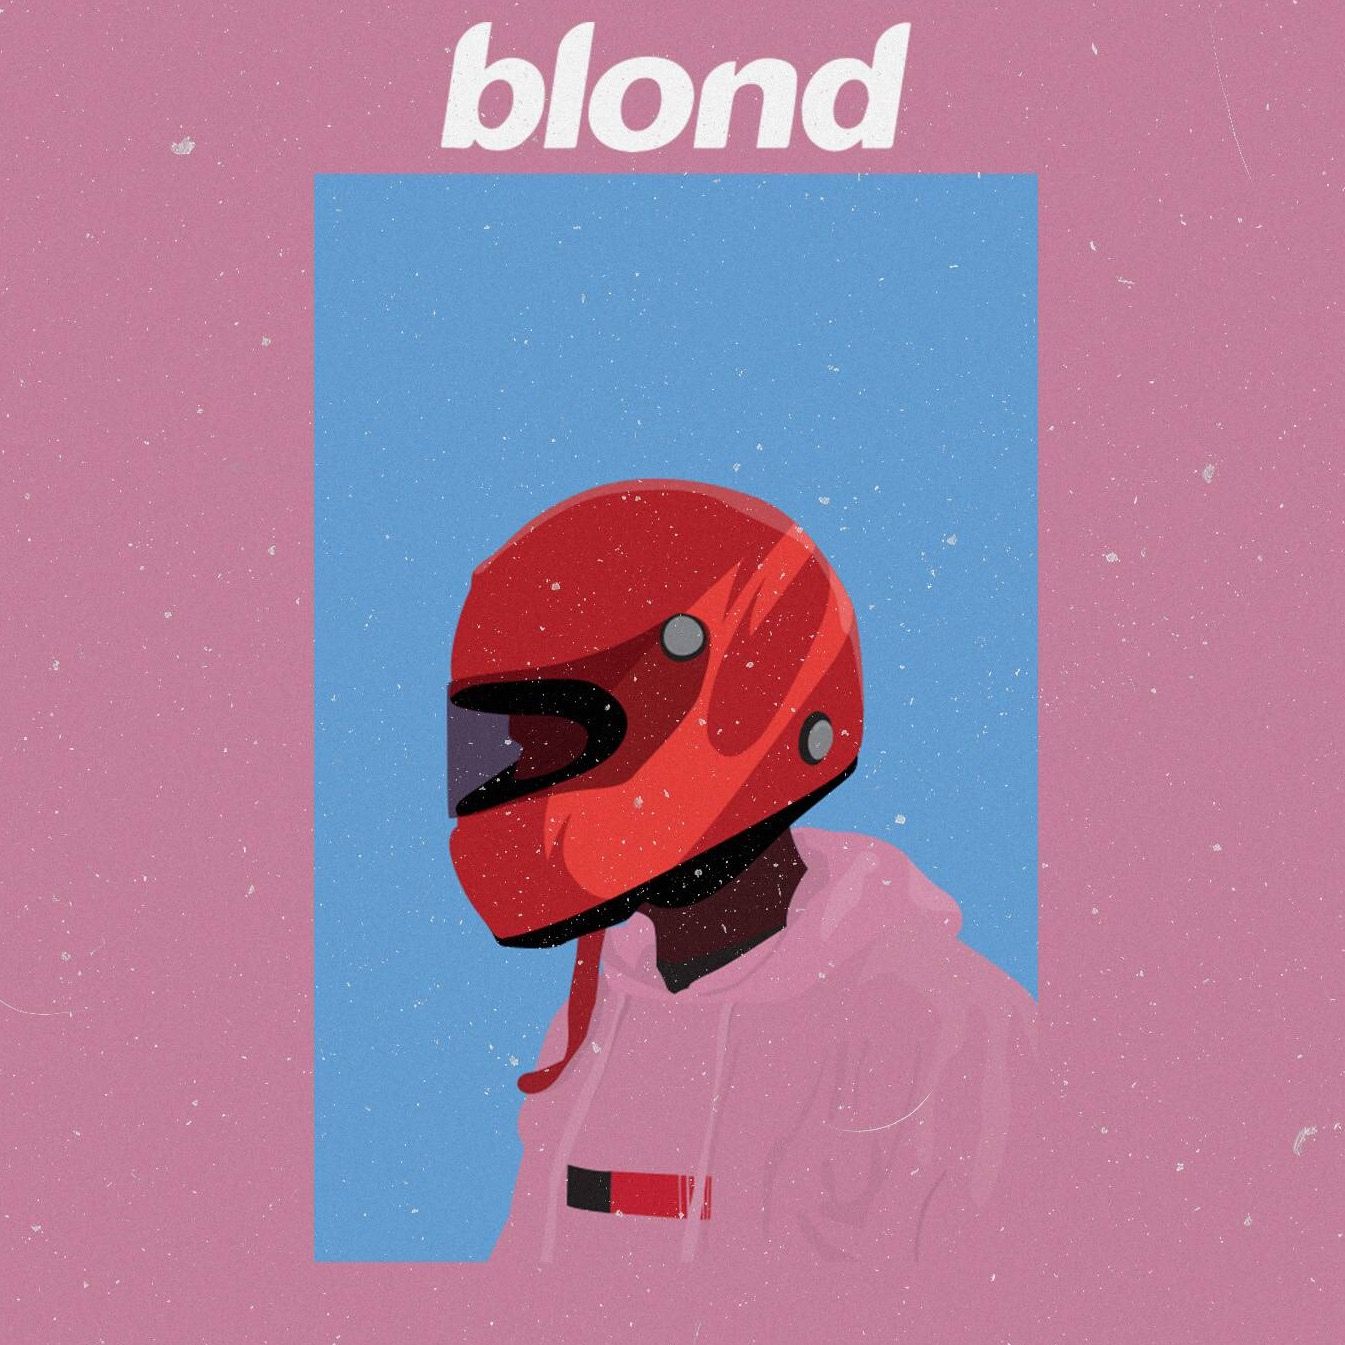 Blond Album Cover Hd Wallpapers